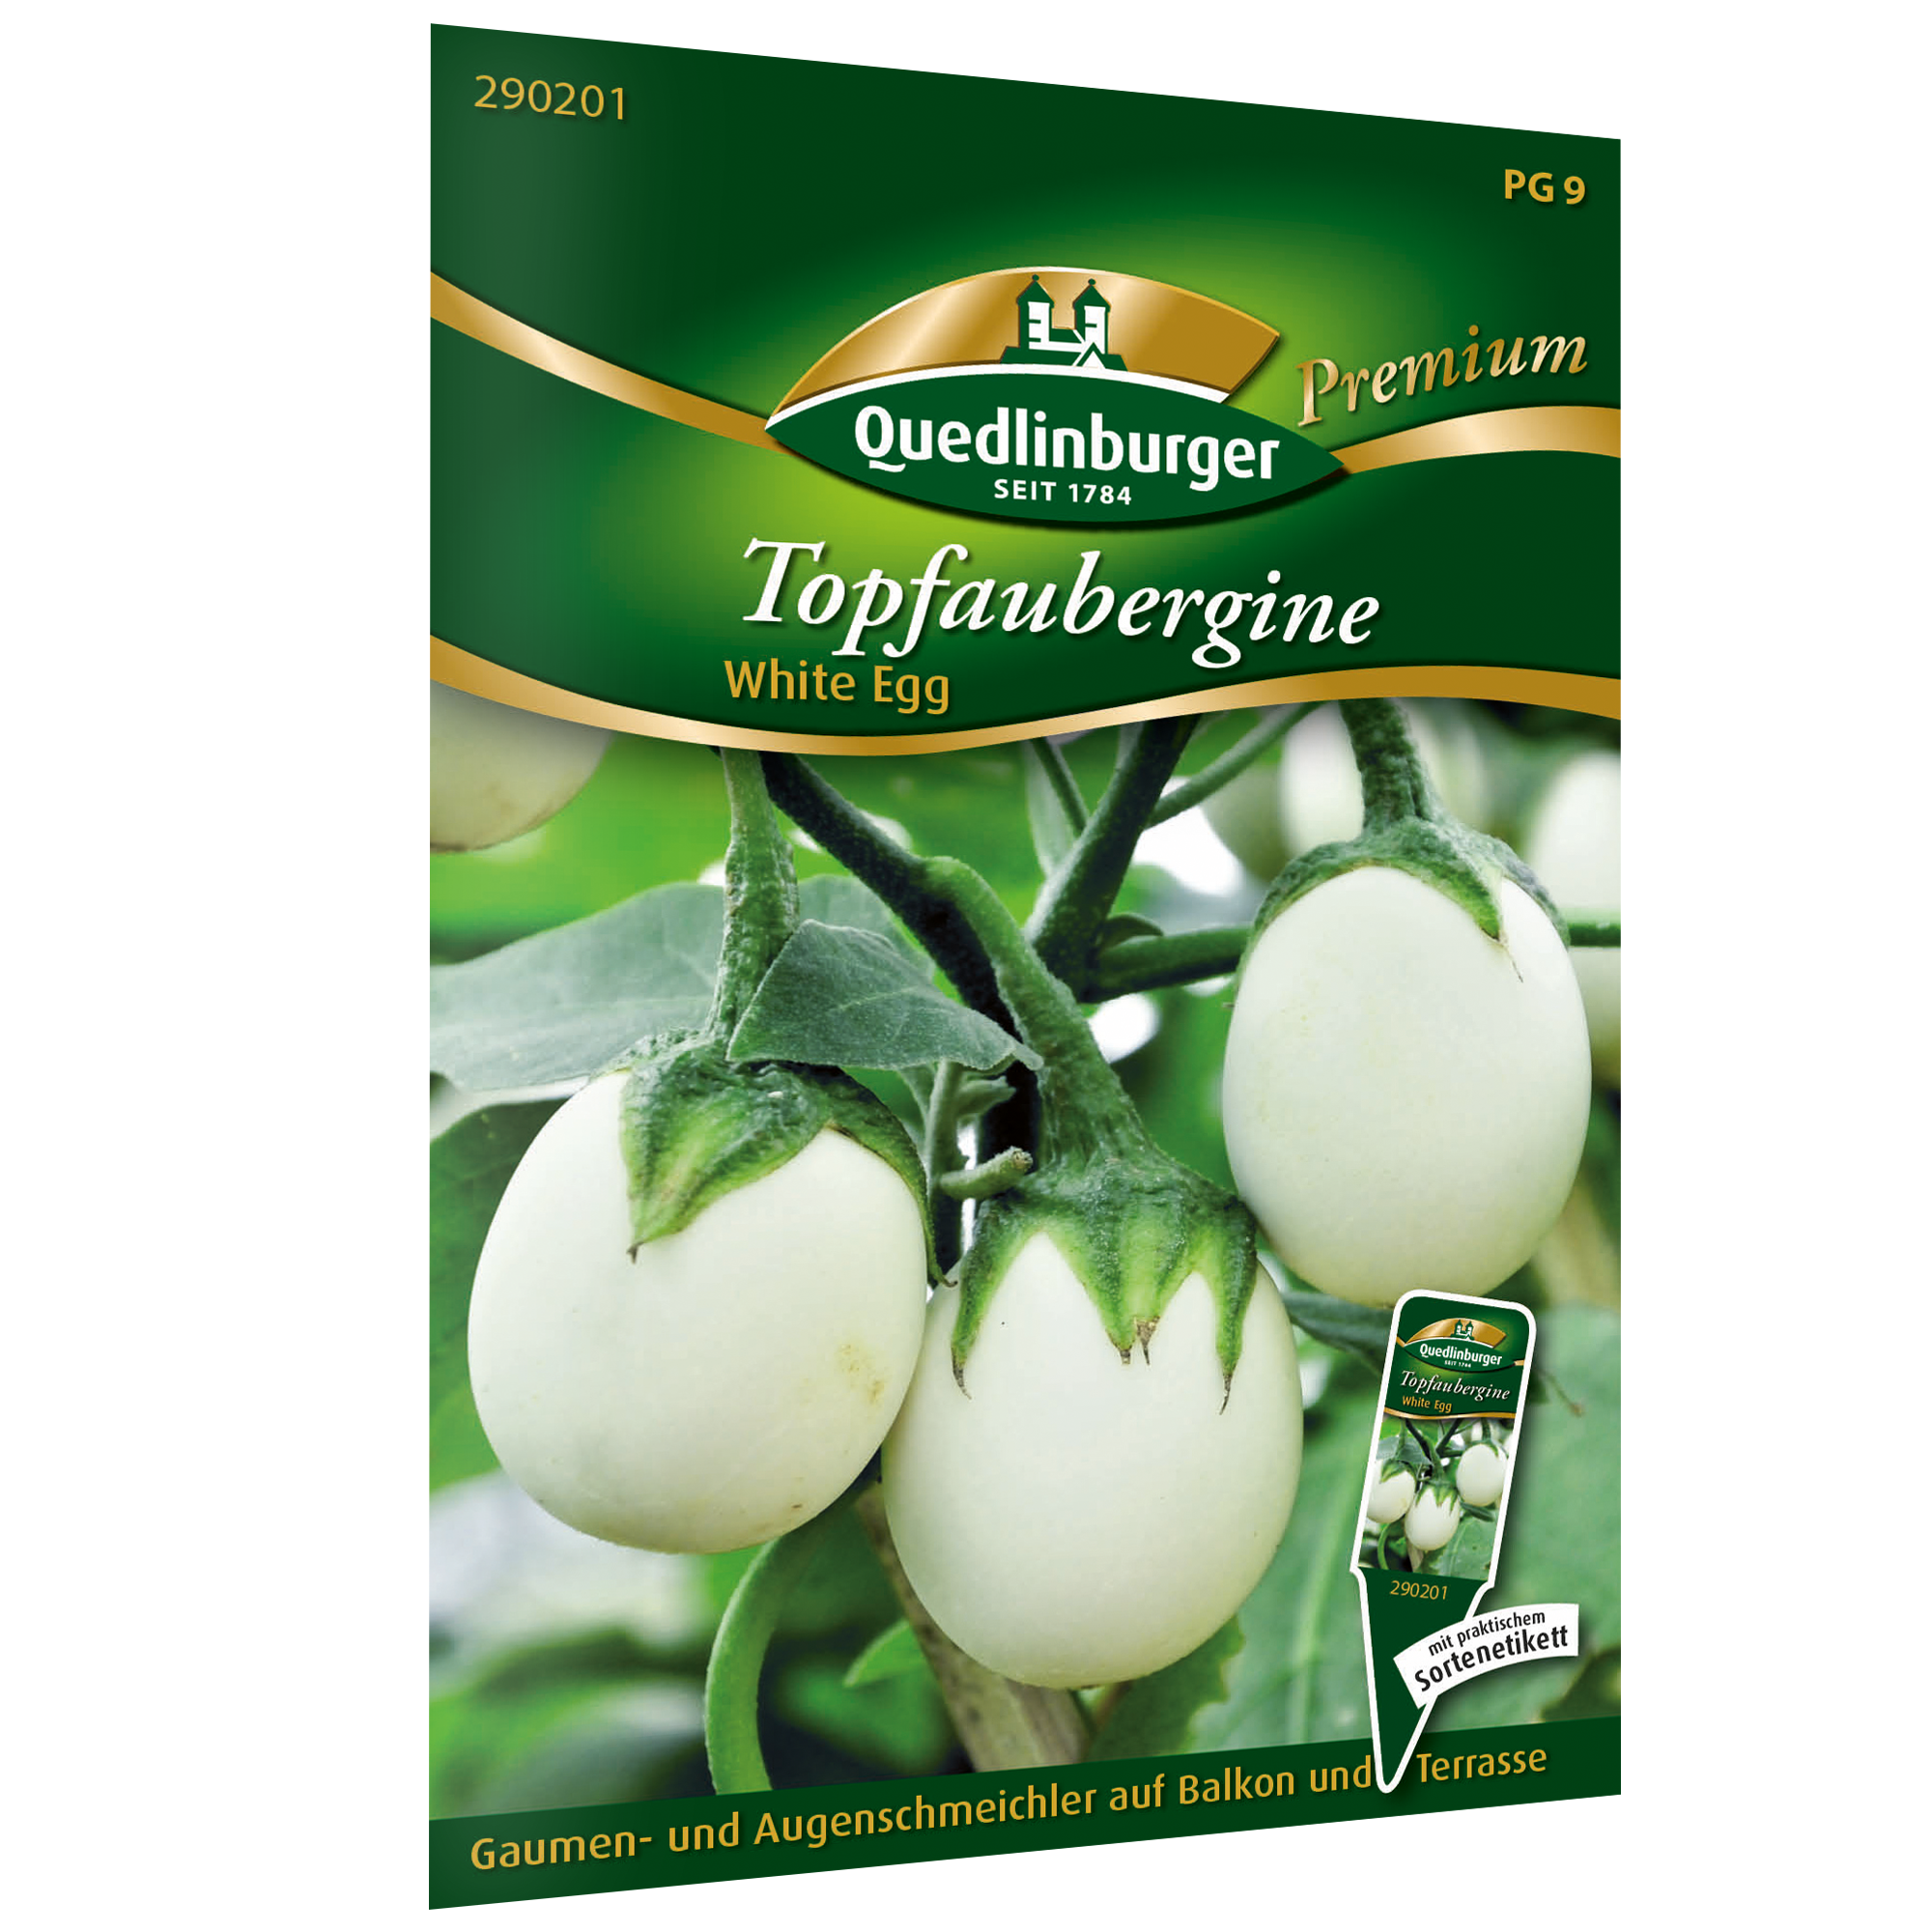 Topfaubergine 'White Egg' + product picture